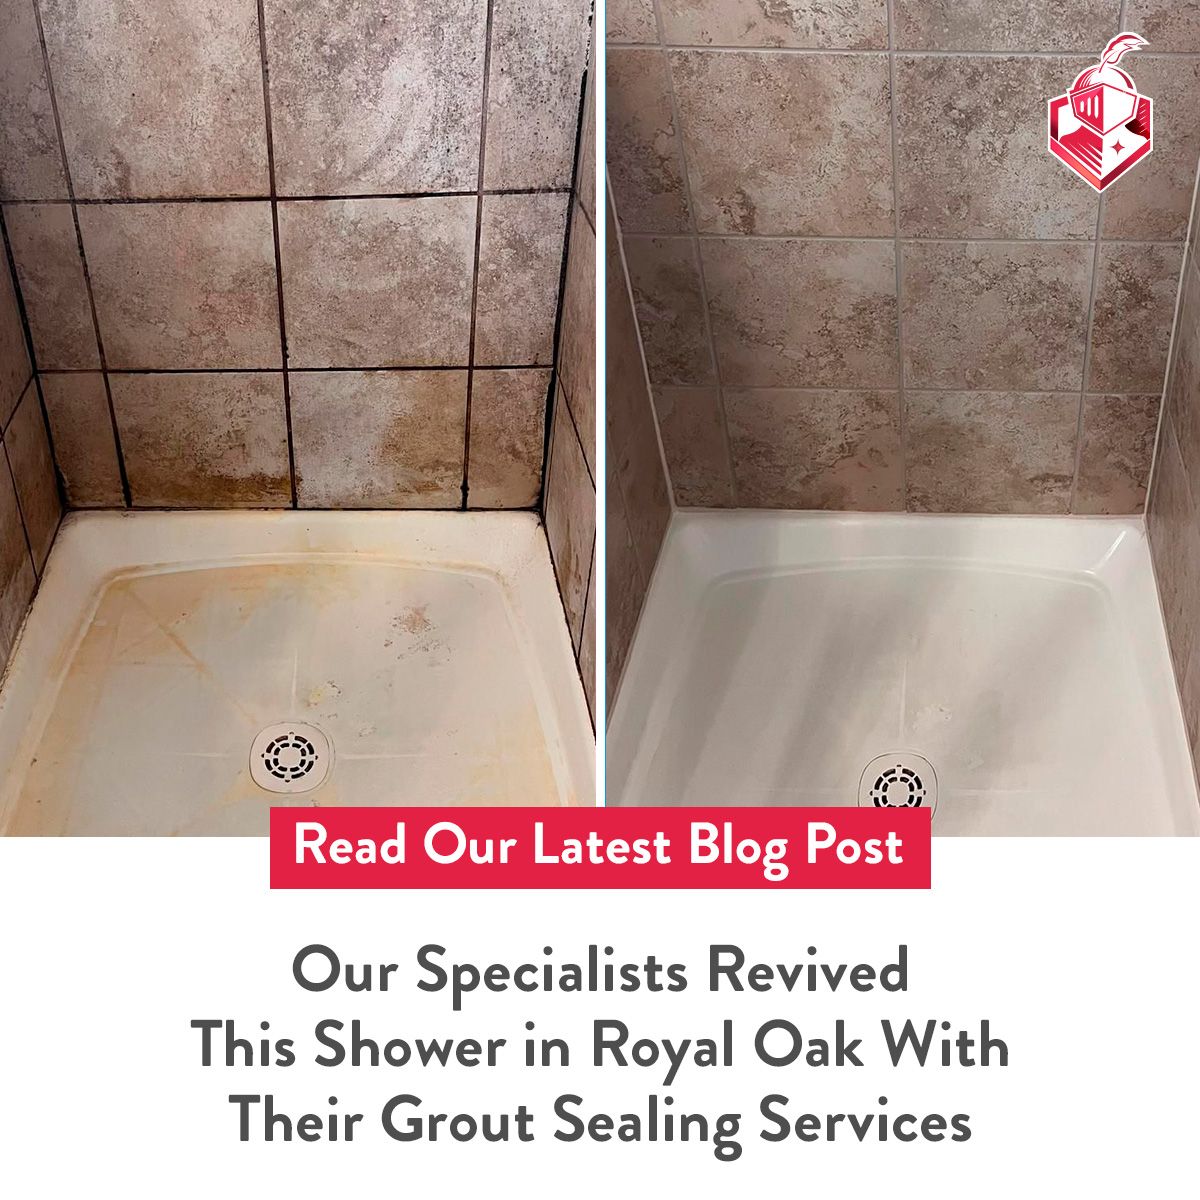 Our Specialists Revived This Shower in Royal Oak With Their Grout Sealing Services